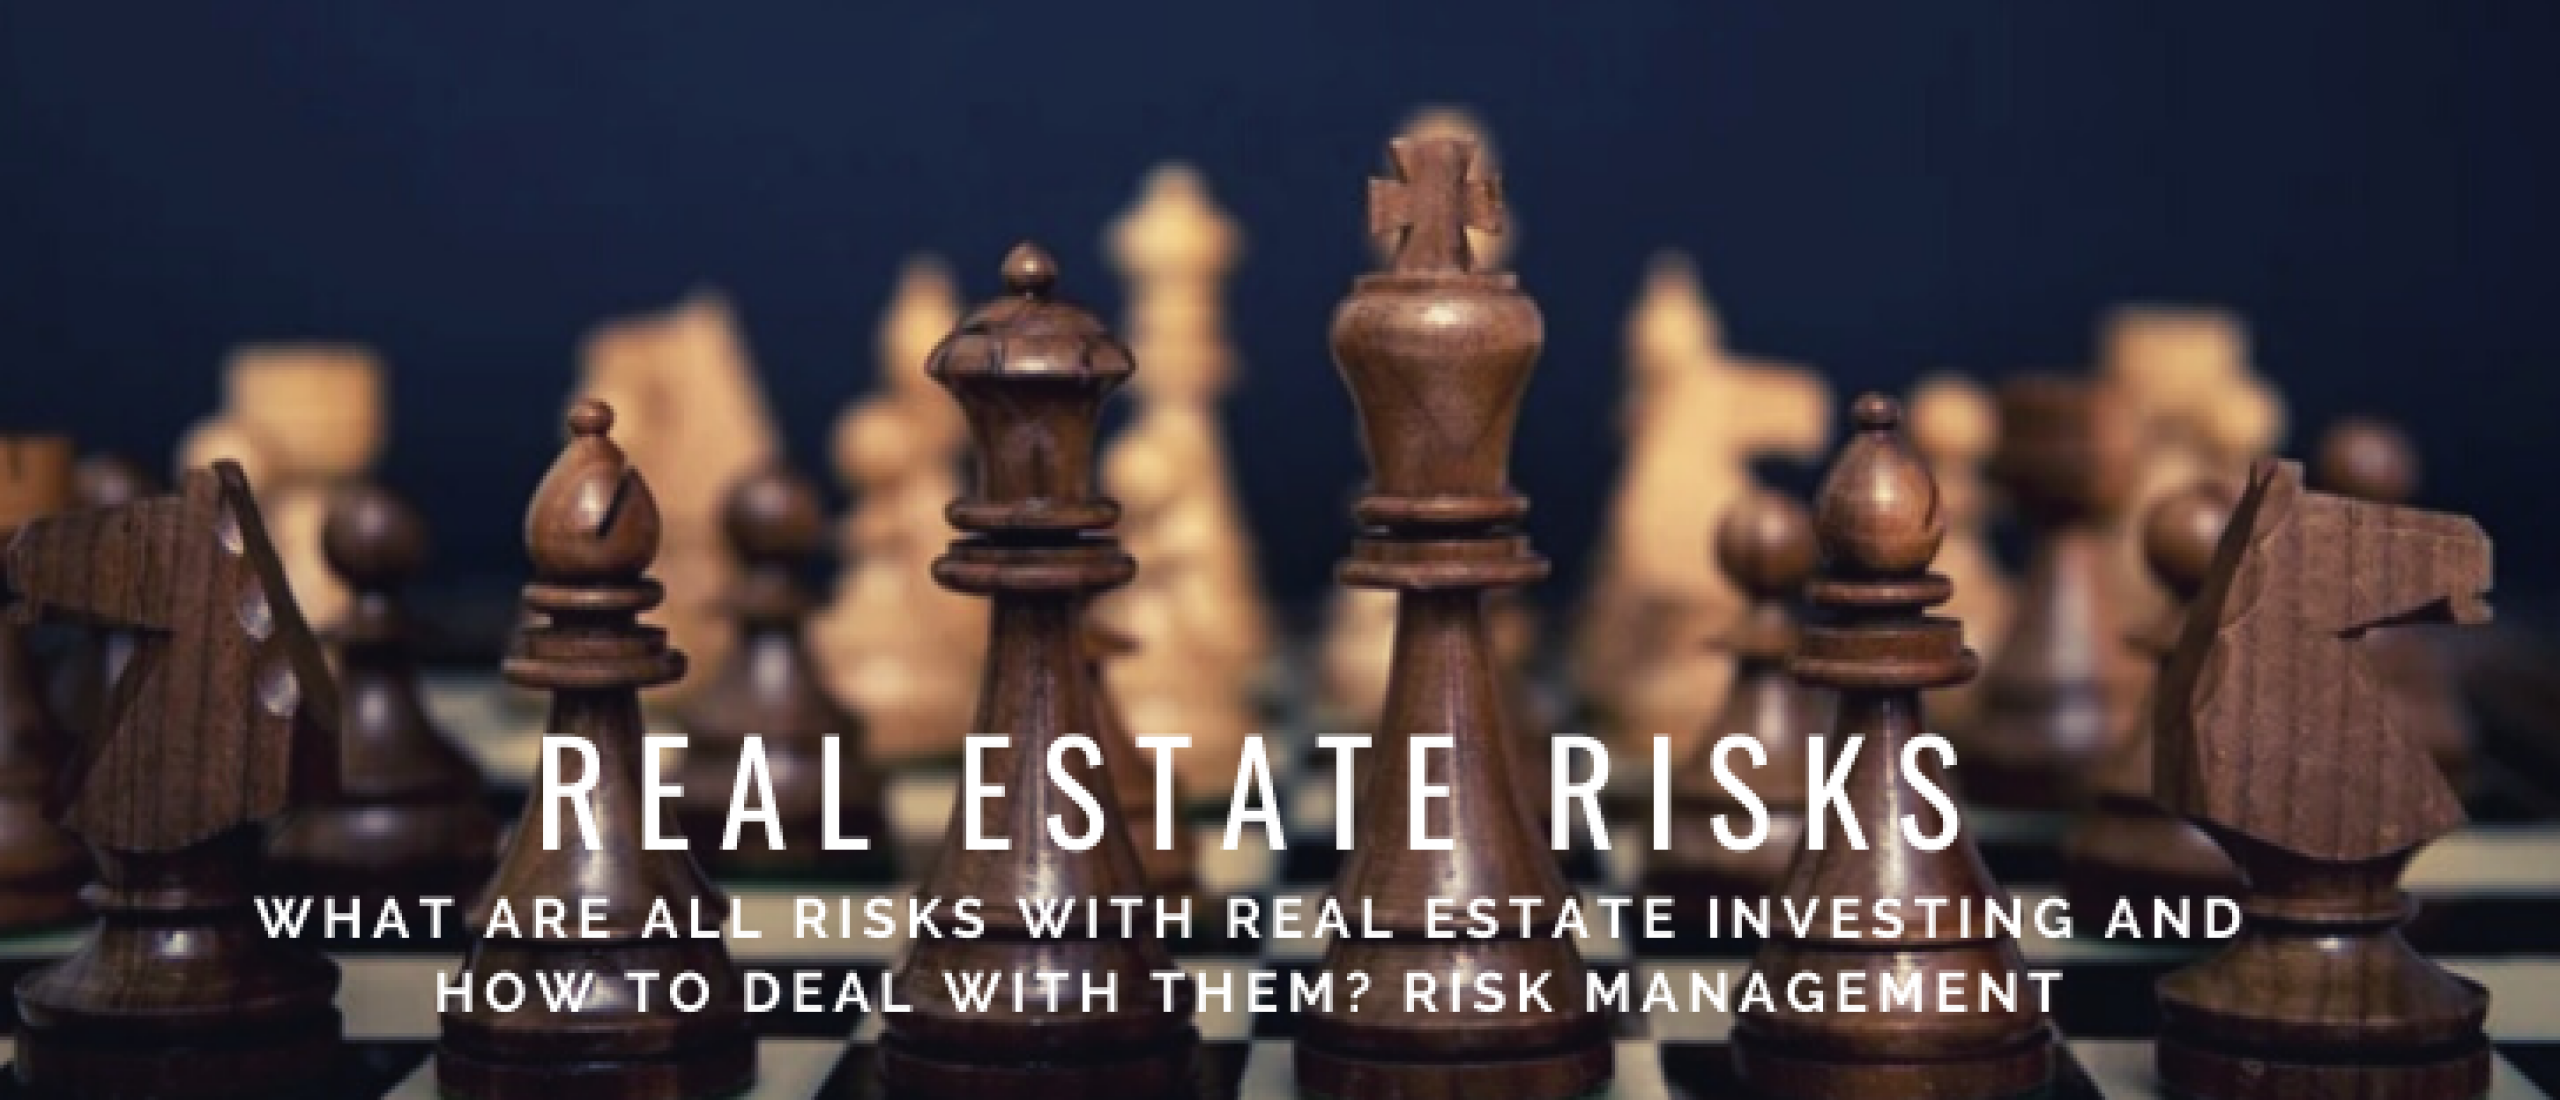 Real Estate Investing Risks and Risk Management: Explanation and Tips